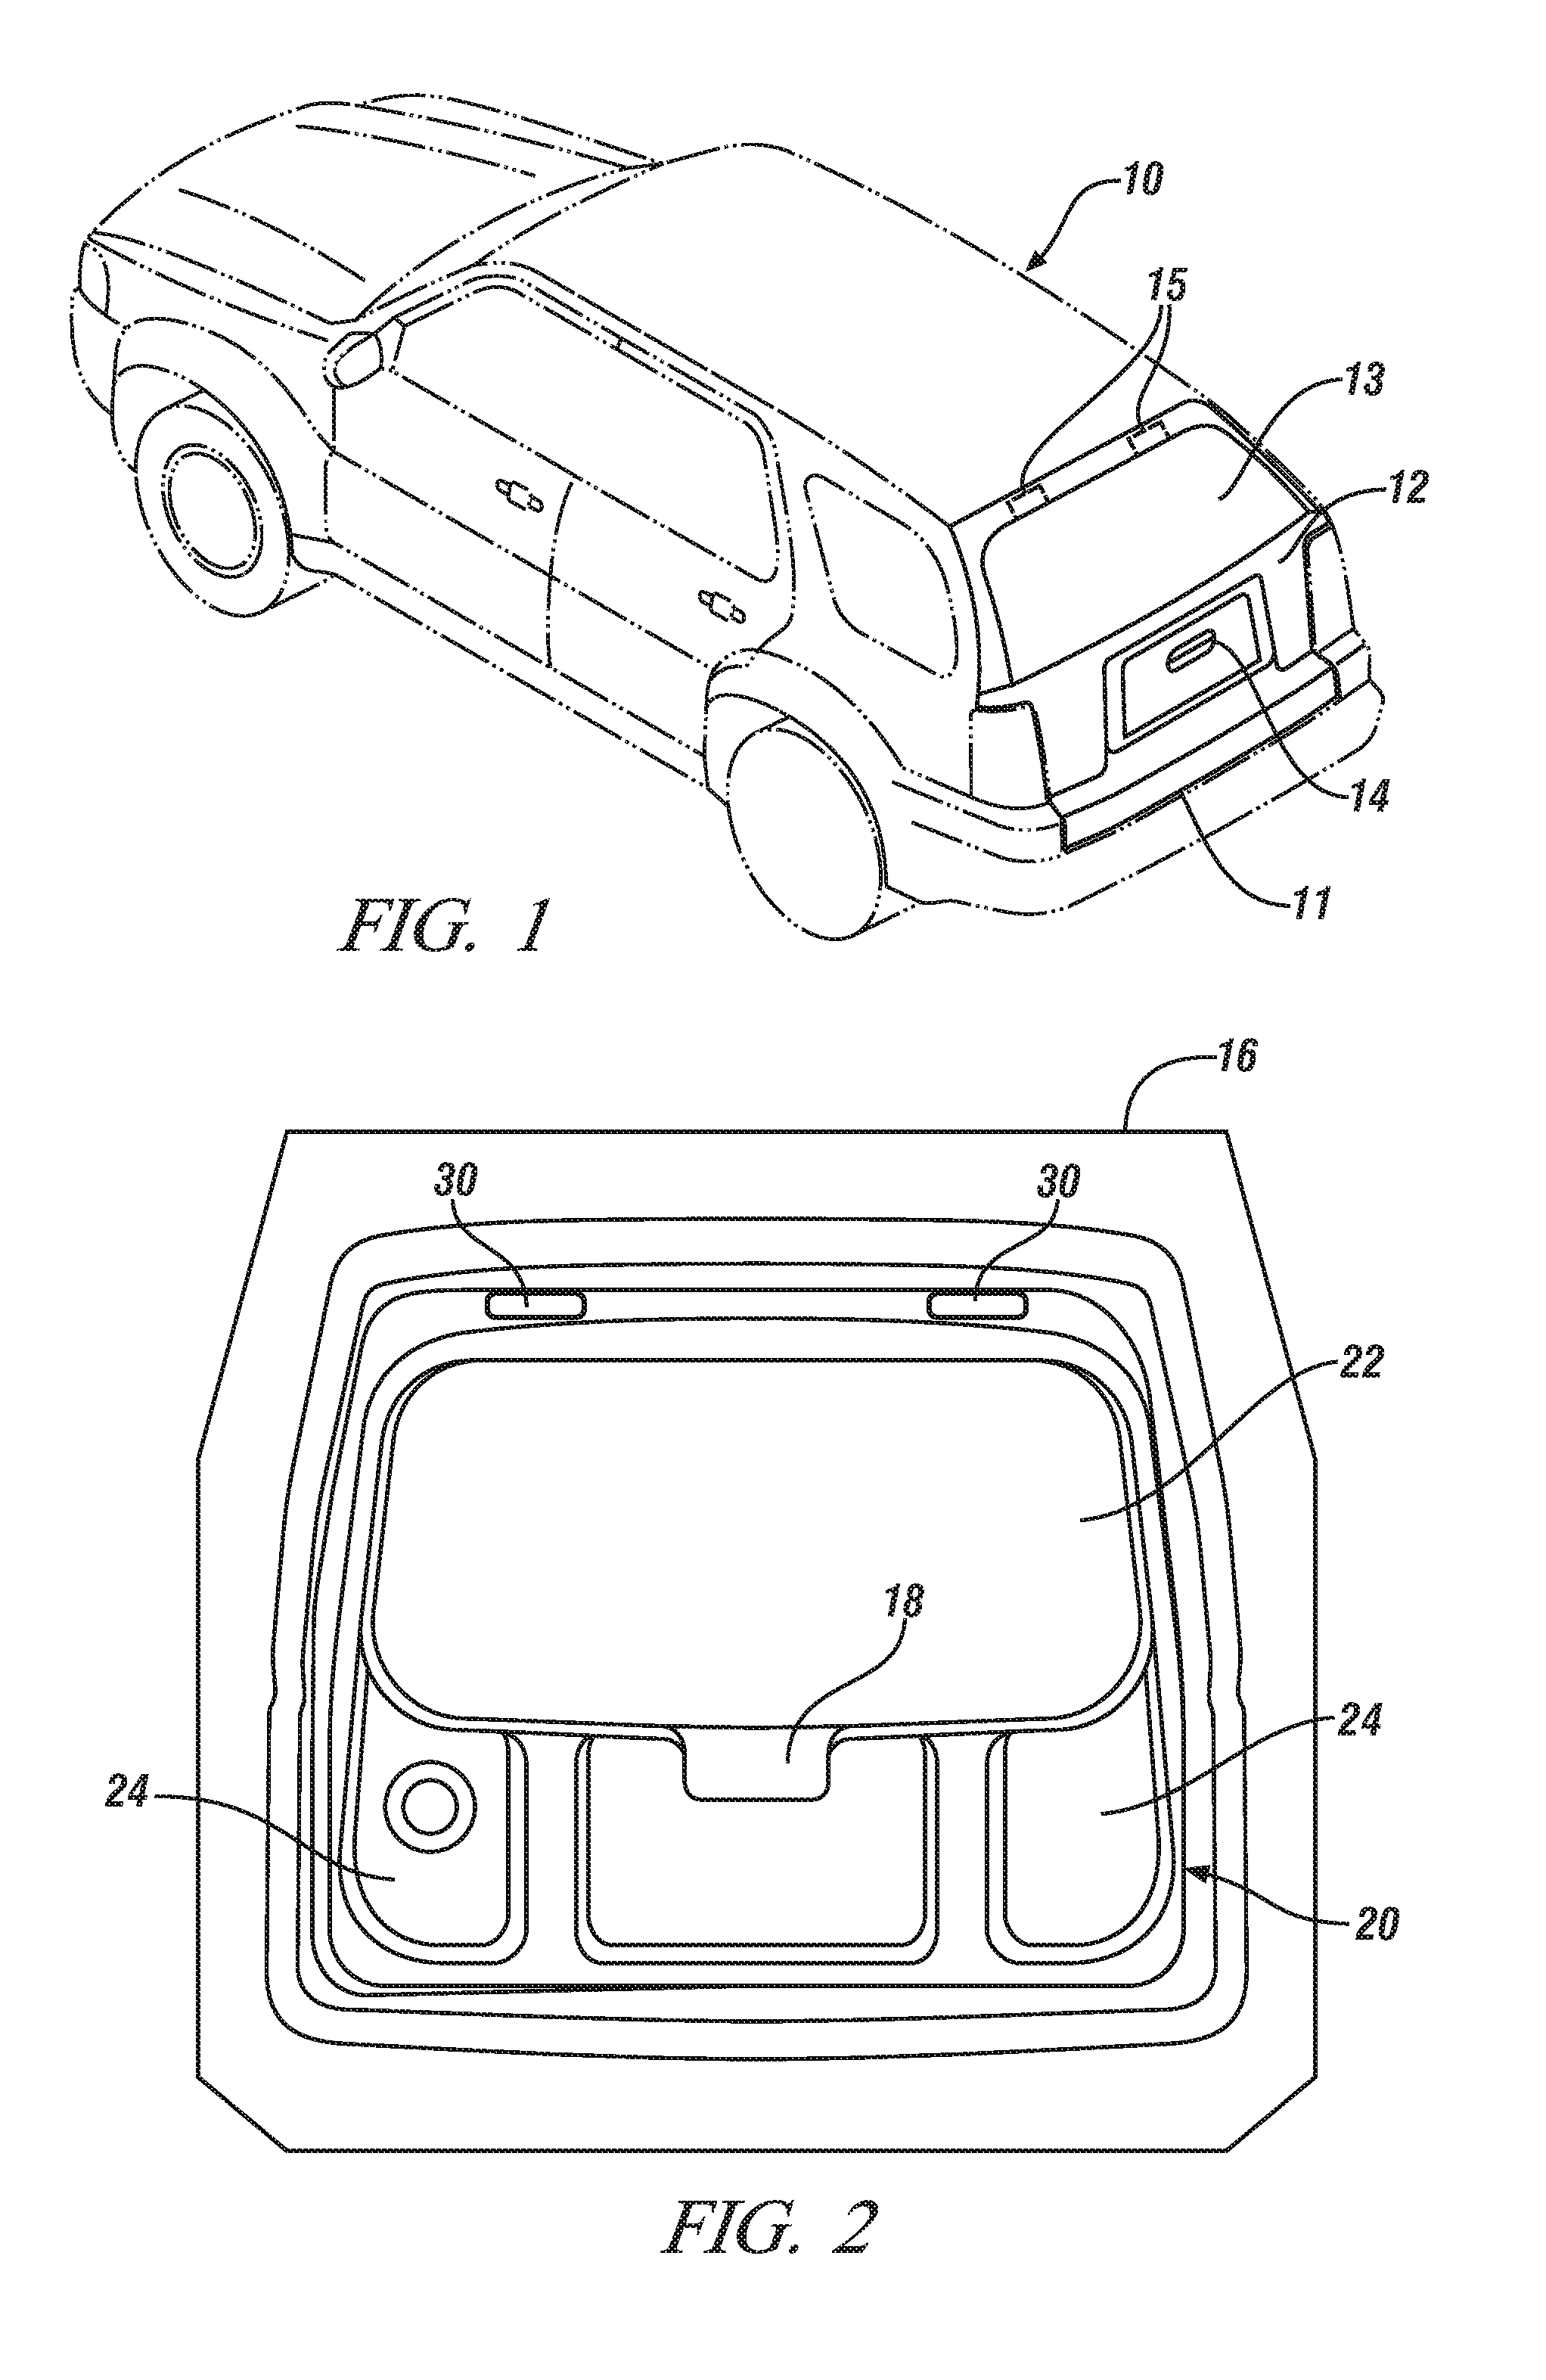 Corrosion resistant magnesium article and method of making